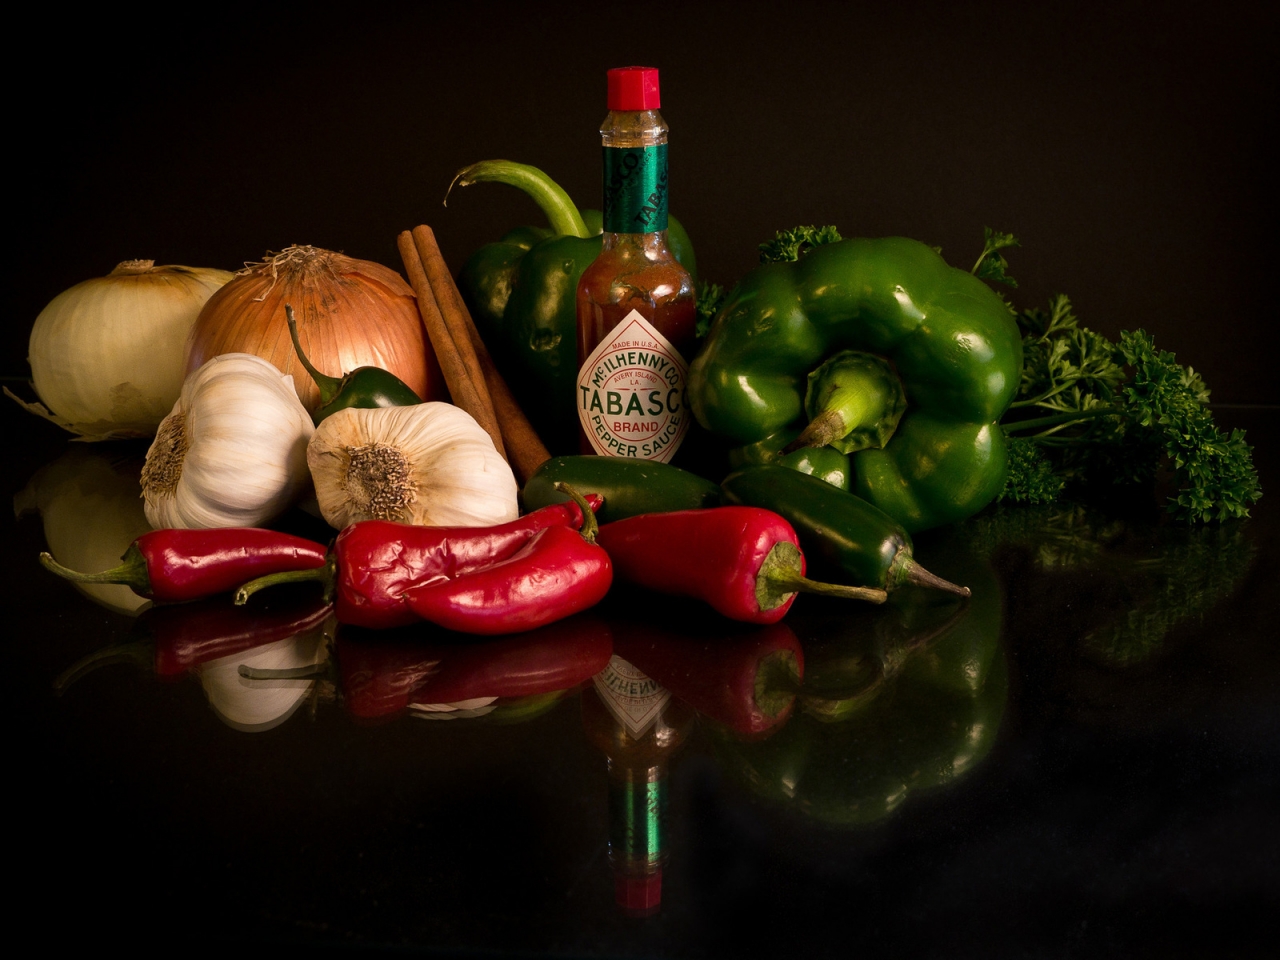 Cool Vegetables and Sauce for 1280 x 960 resolution